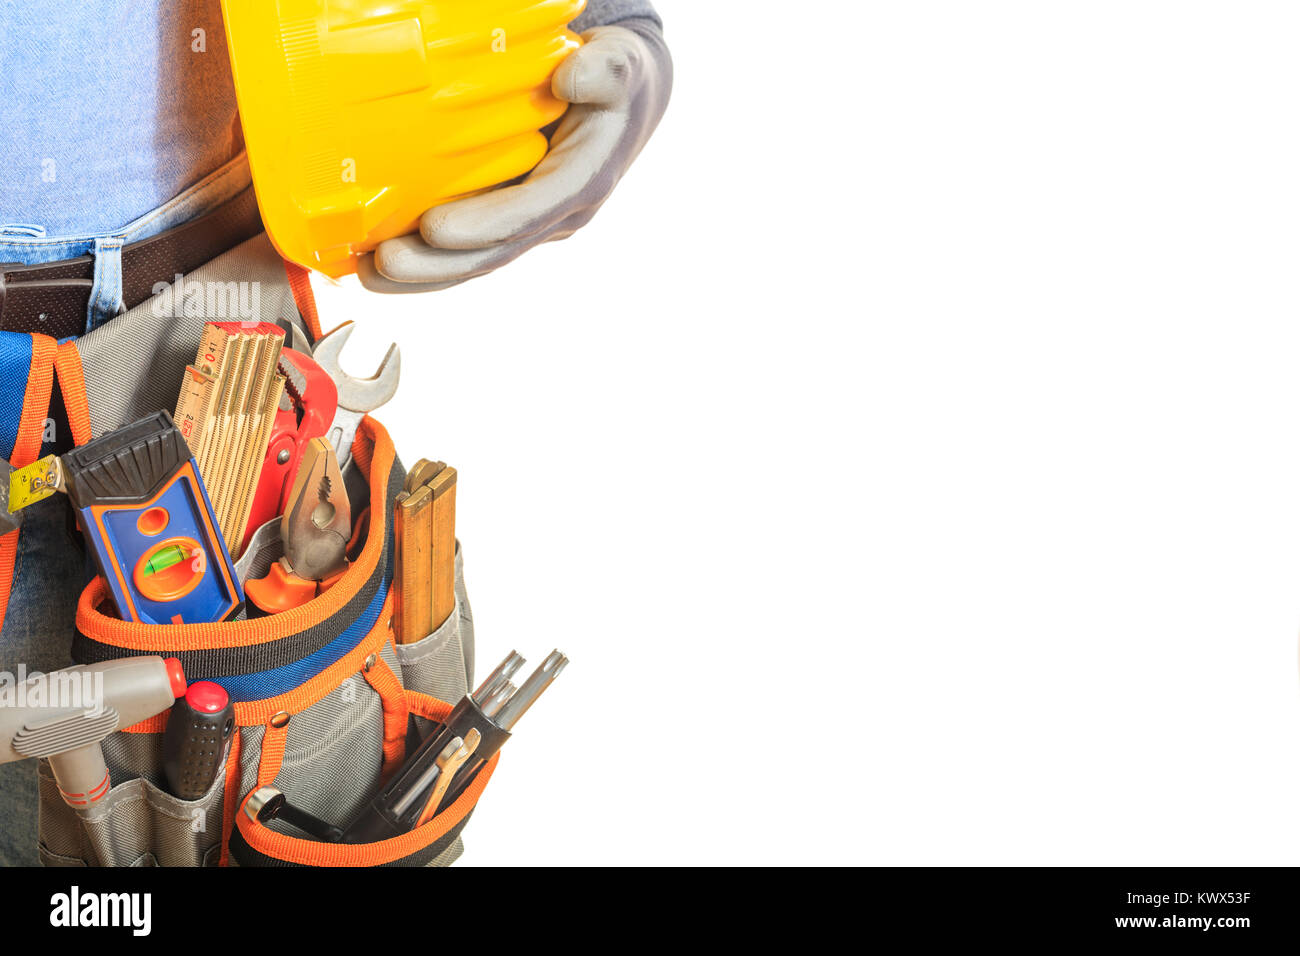 Worker with safety equipment on white background Stock Photo